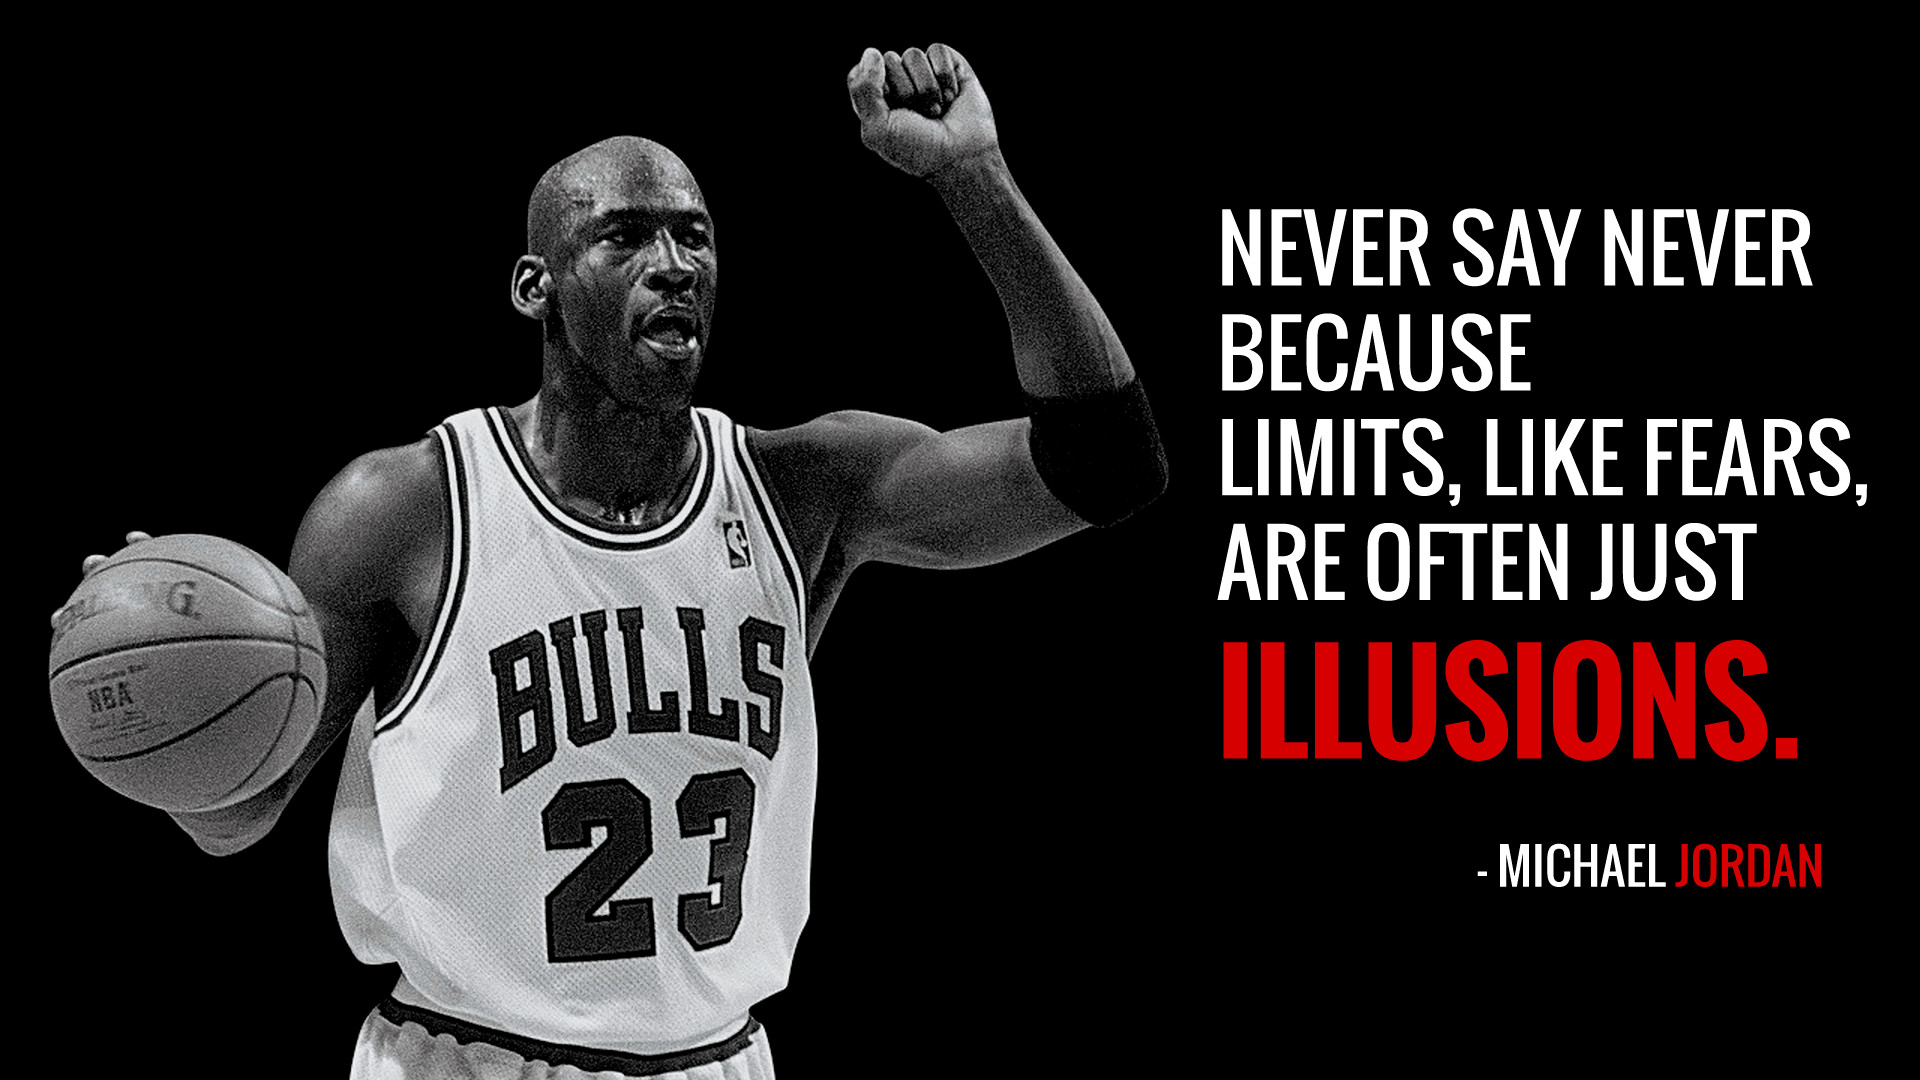 Motivational Quotes For Athletes
 25 All Time Best Inspirational Sports Quotes To Get You Going